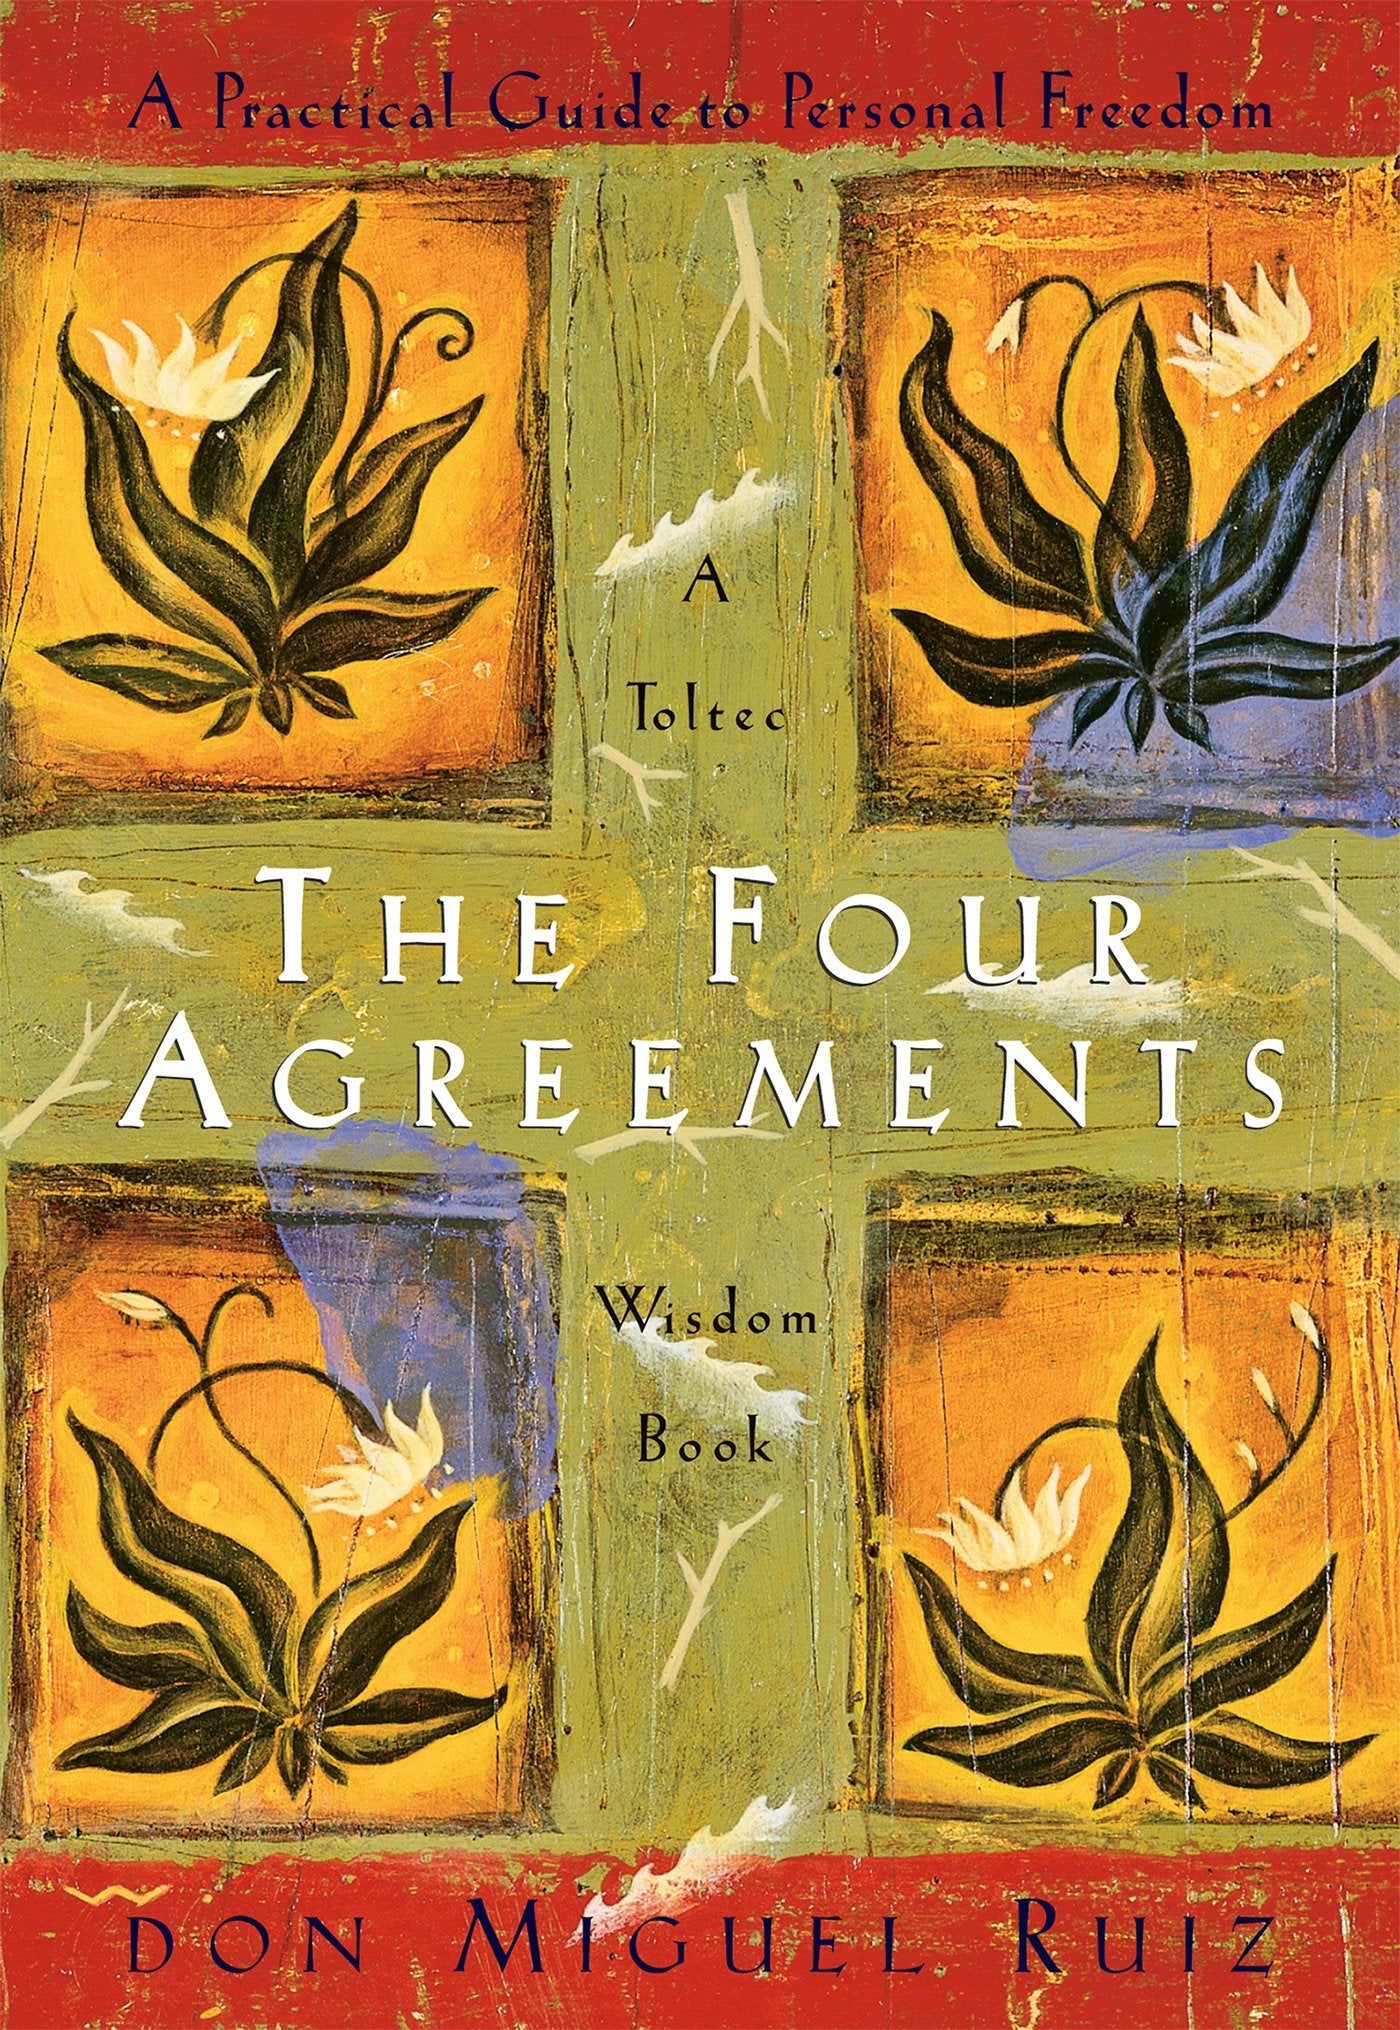 The Four Agreements: A Practical Guide to Personal Freedom (Toltec Wisdom) by Don Miguel Ruiz - LV'S Global Media